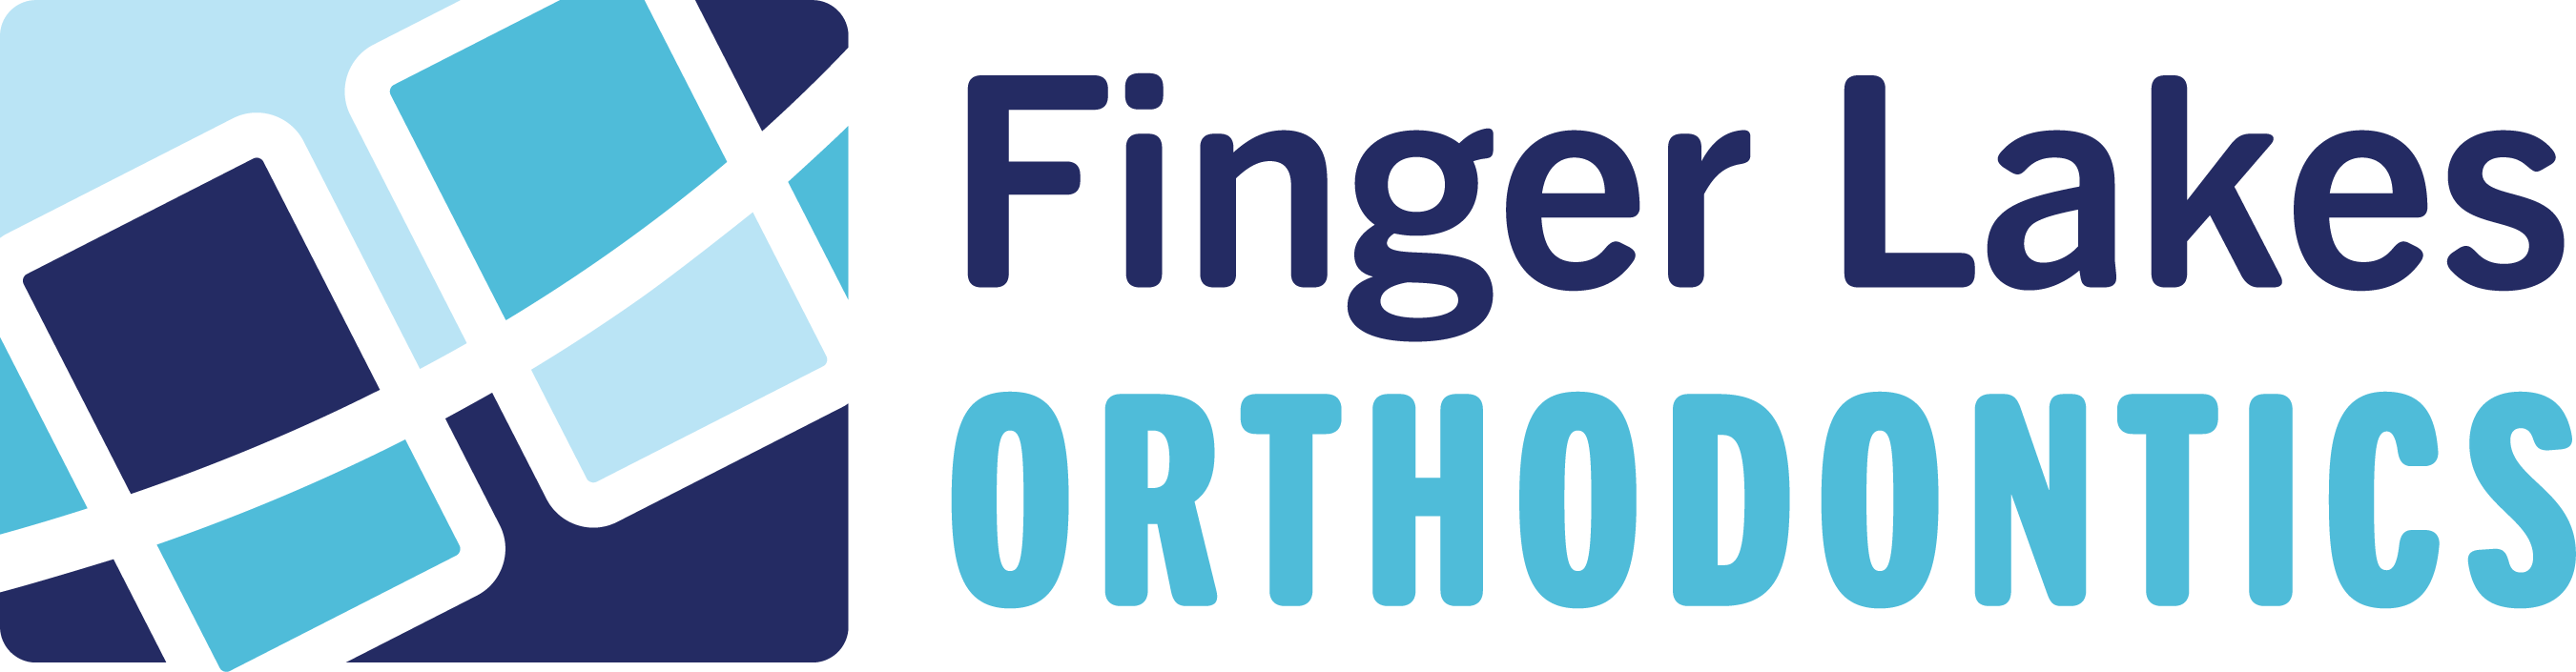 Finger Lakes Orthodontics - Braces and Invisalign For All Ages in Horseheads and Corning, NY